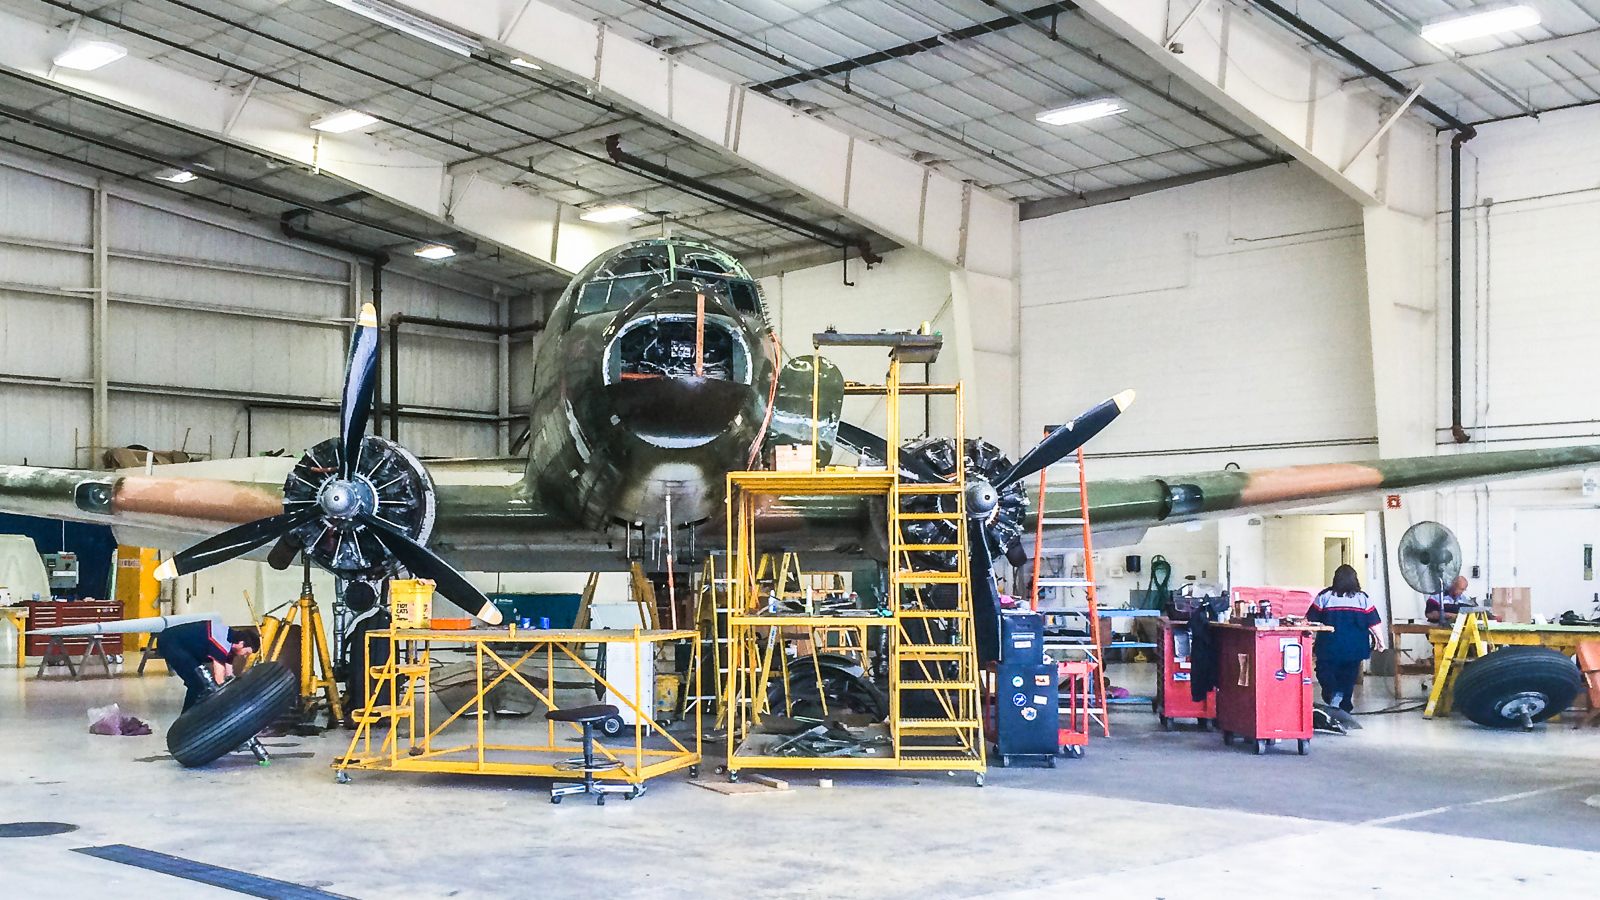 “That’s All, Brother” undergoing restoration. Photo courtesy of the Commemorative Air Force.